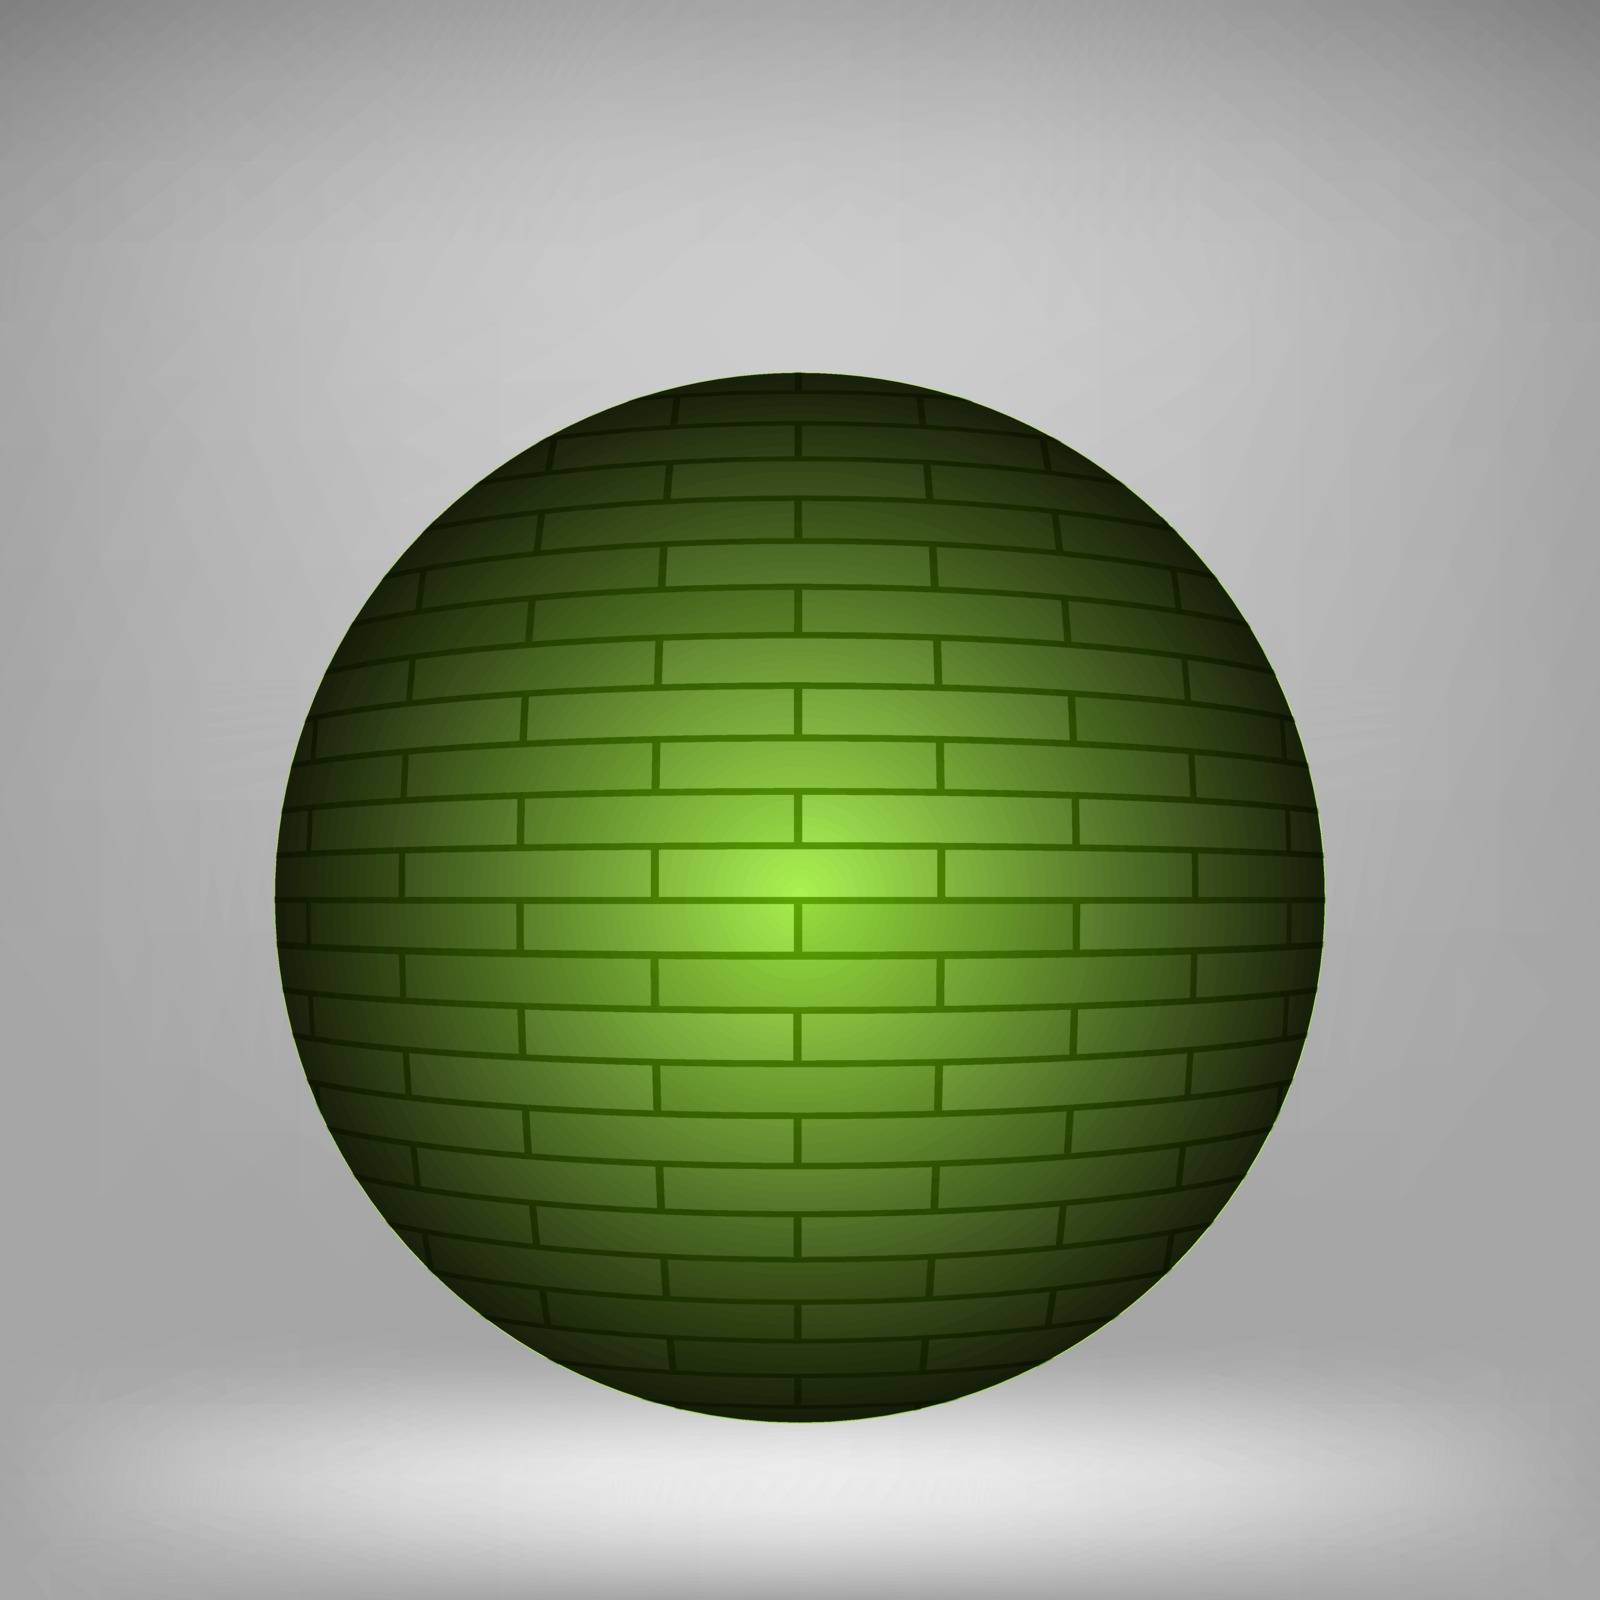 Green Brick Sphere on Grey Background for your Design. 